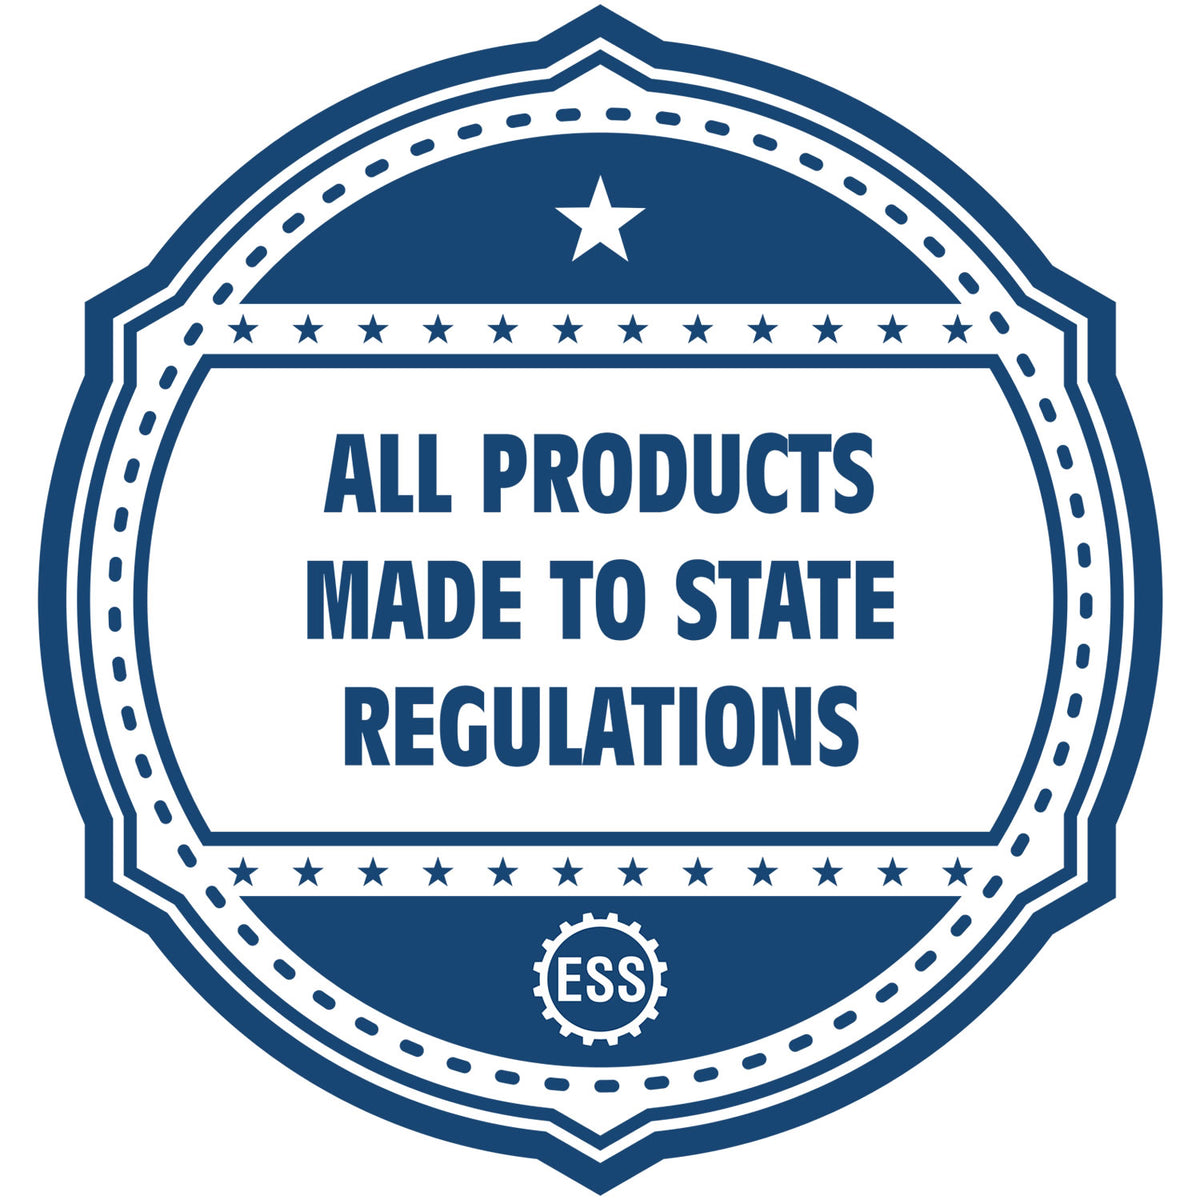 An icon or badge element for the Digital Ohio Landscape Architect Stamp showing that this product is made in compliance with state regulations.